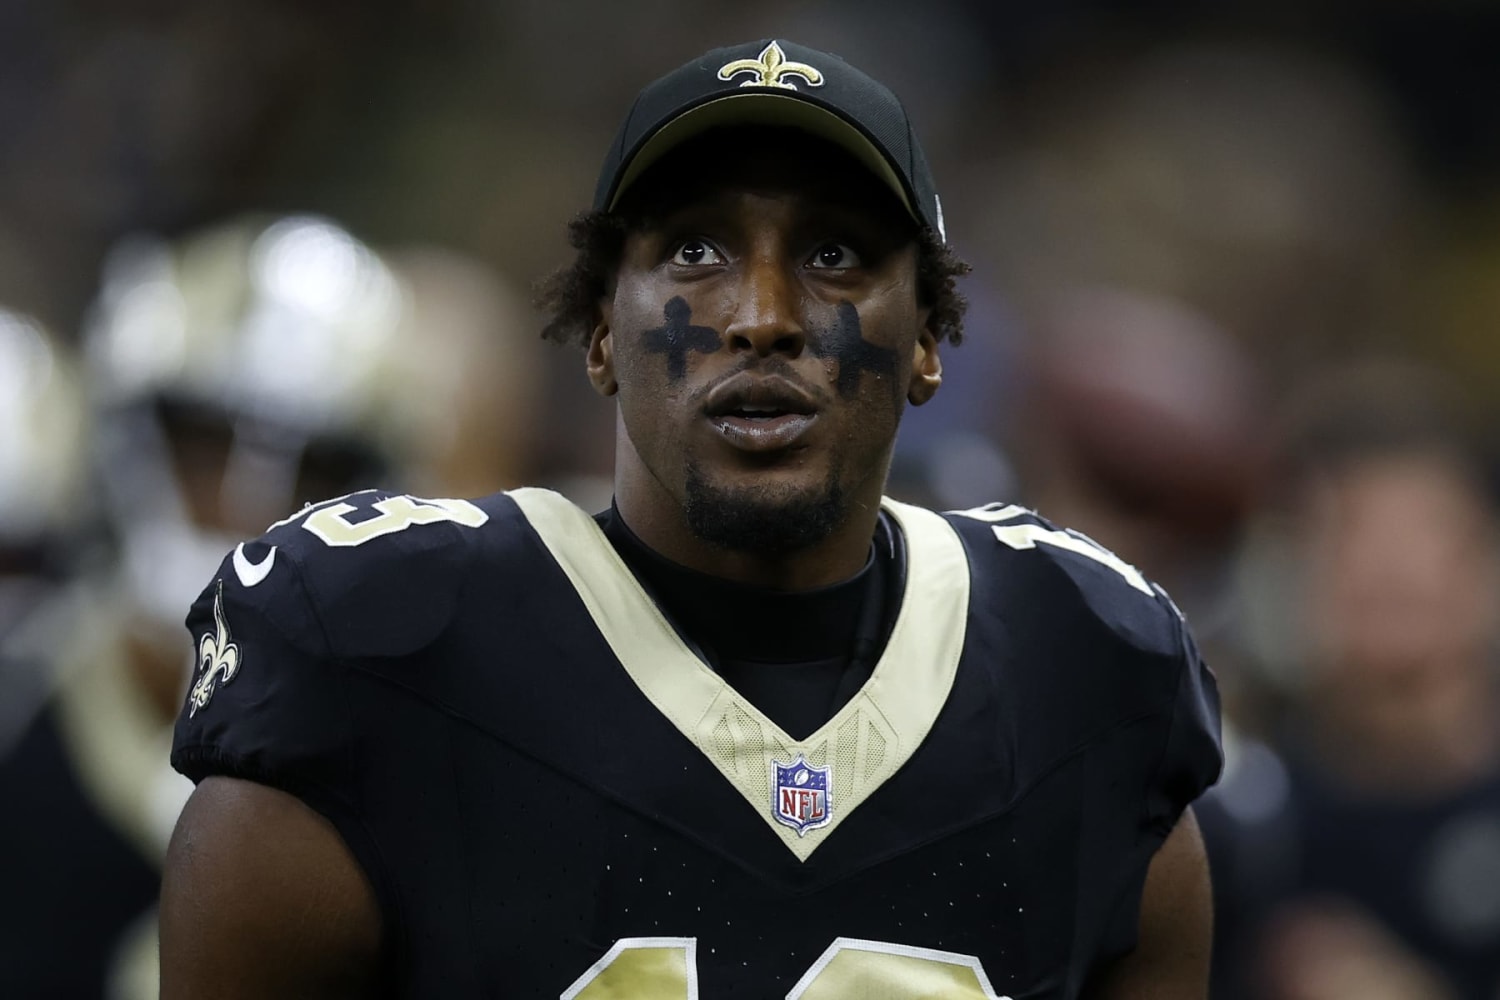 Saints fined more than $550K for player believed to be faking injury